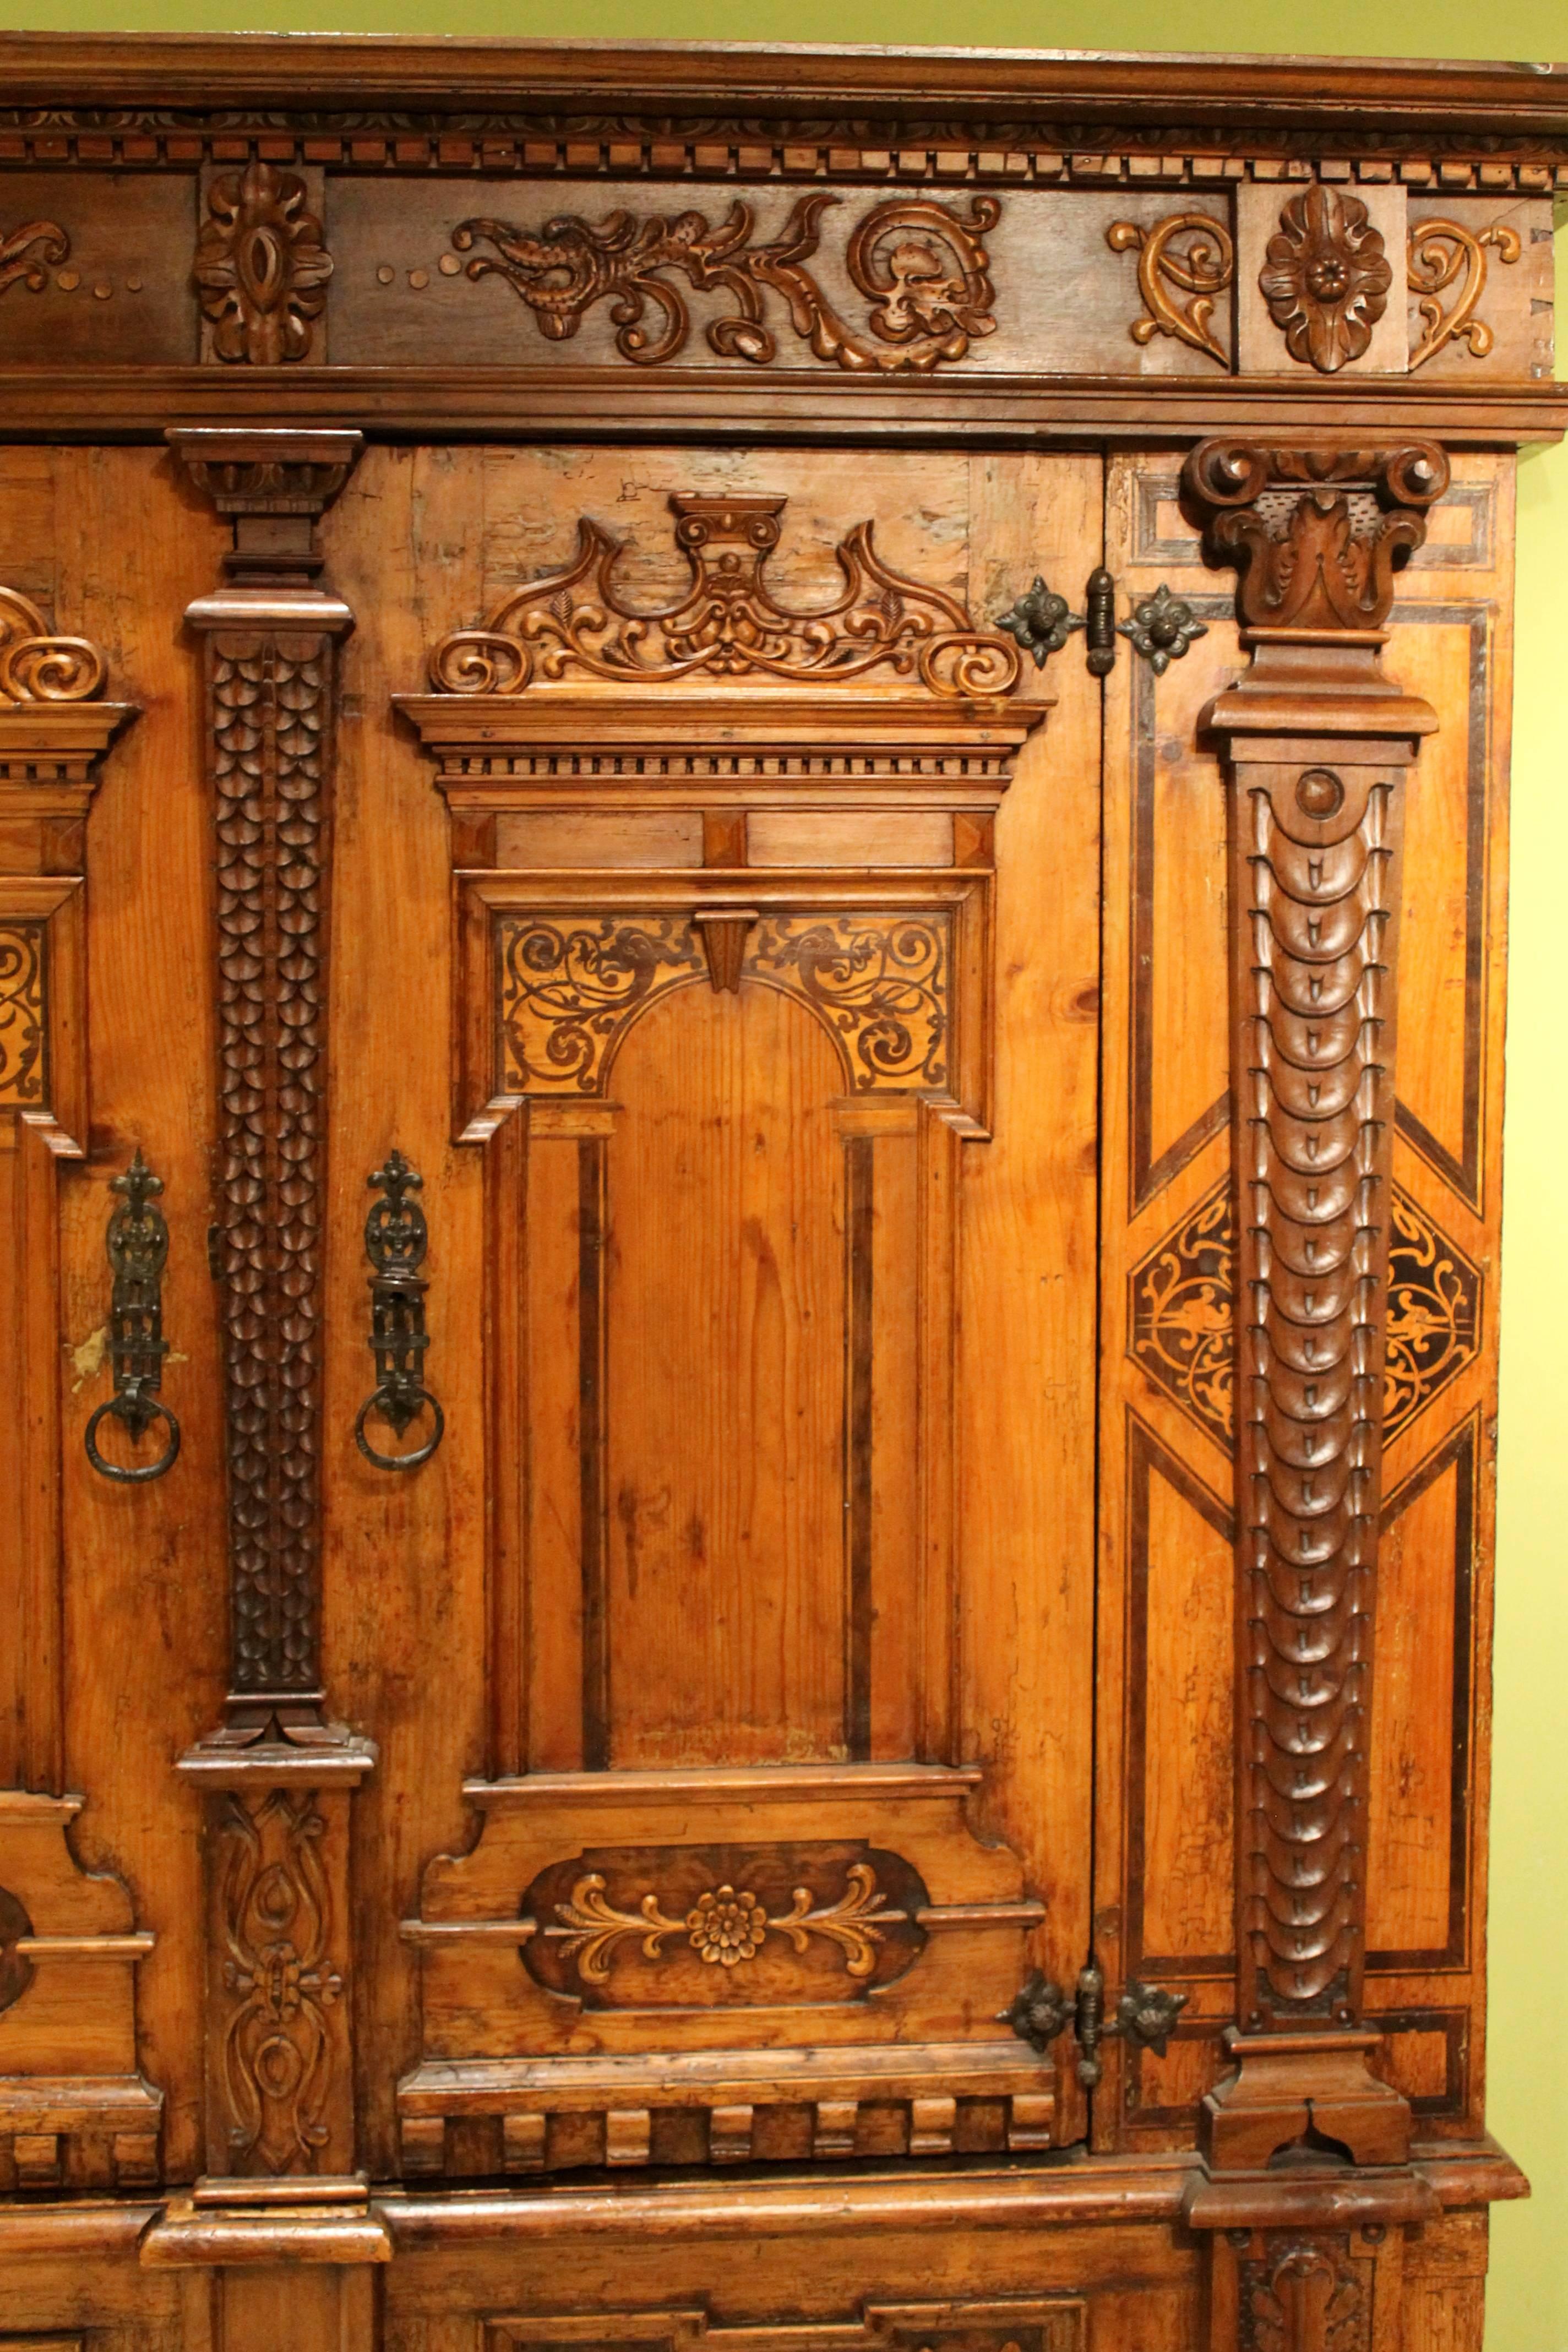 This exquisite Baroque period two doors armoire cabinet is made of light caramel-colored walnut wood and solid birch wood core with intricately and precious oak moulding decoration throughout. This luxury architecturally structured cabinet features